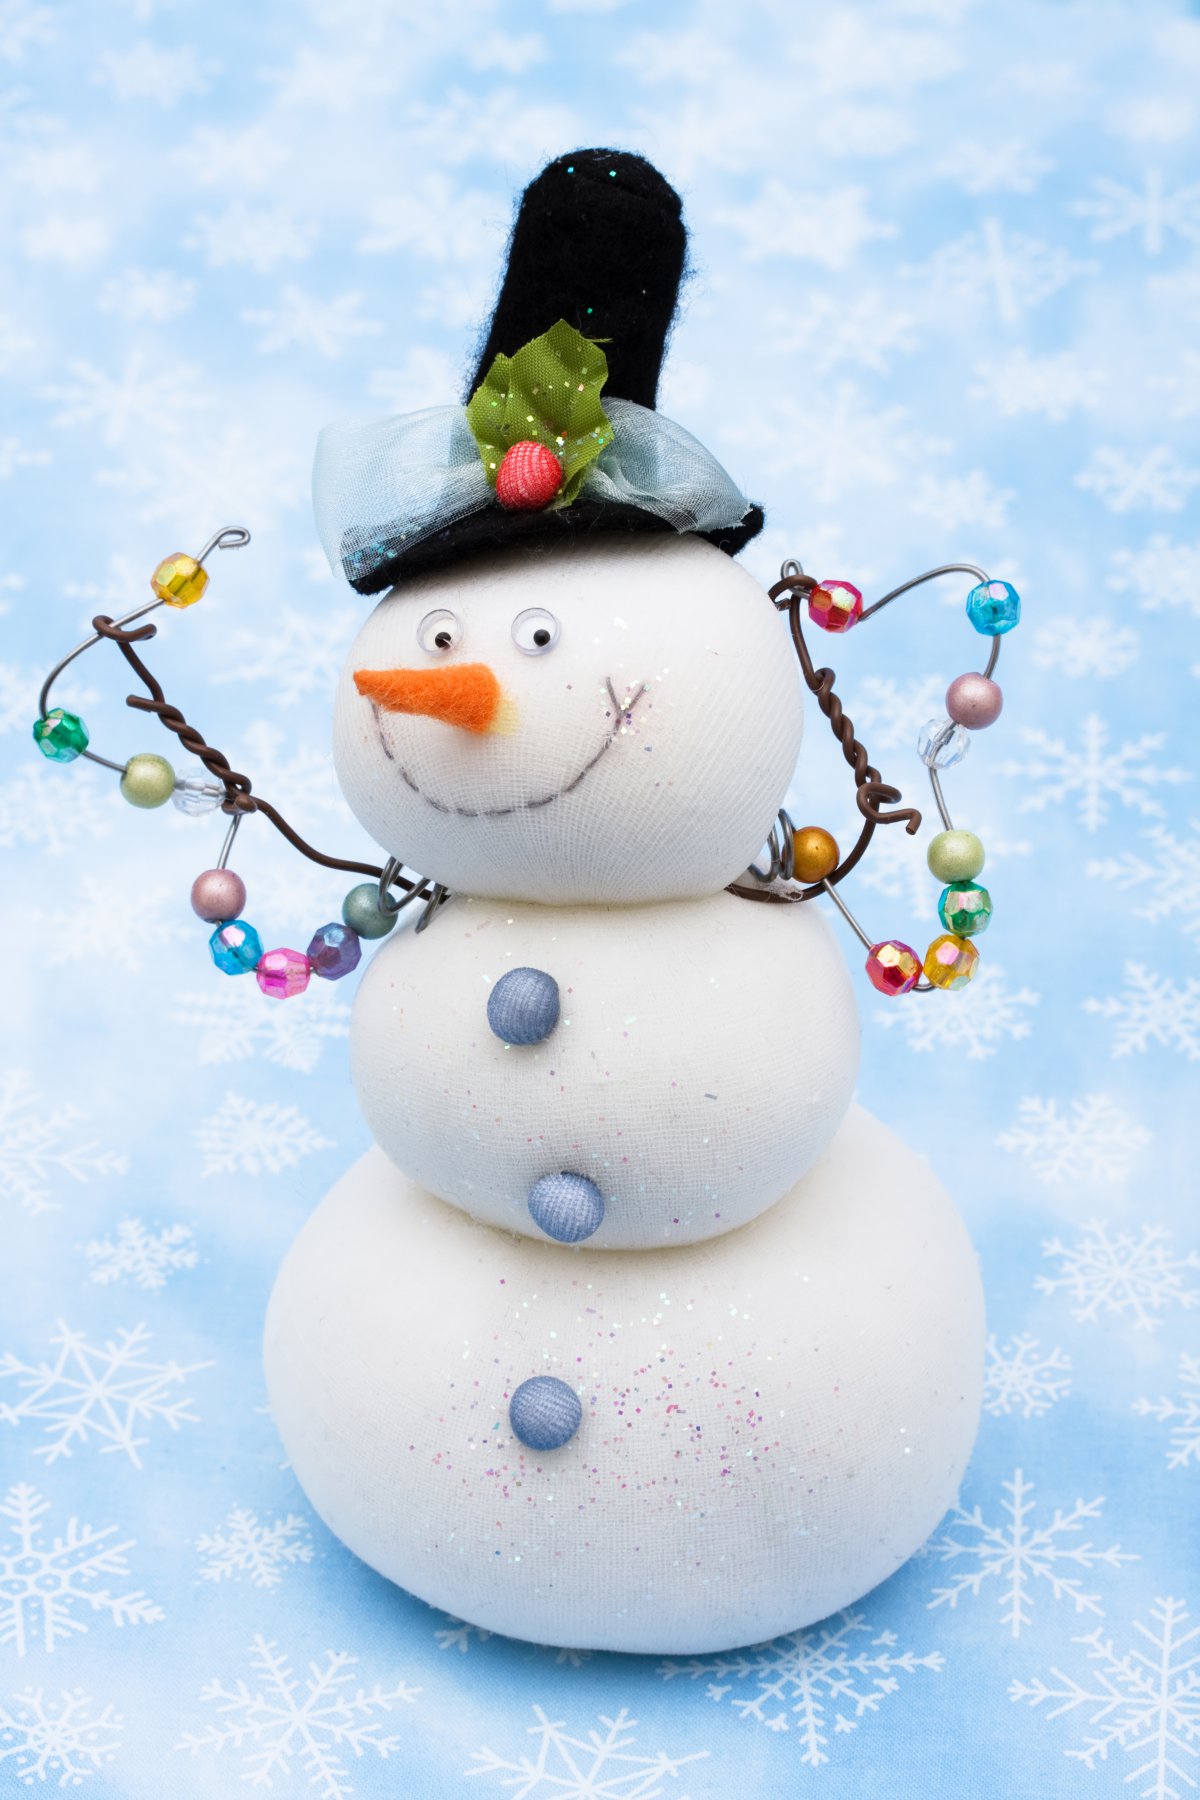 Cute snowman scenery pictures